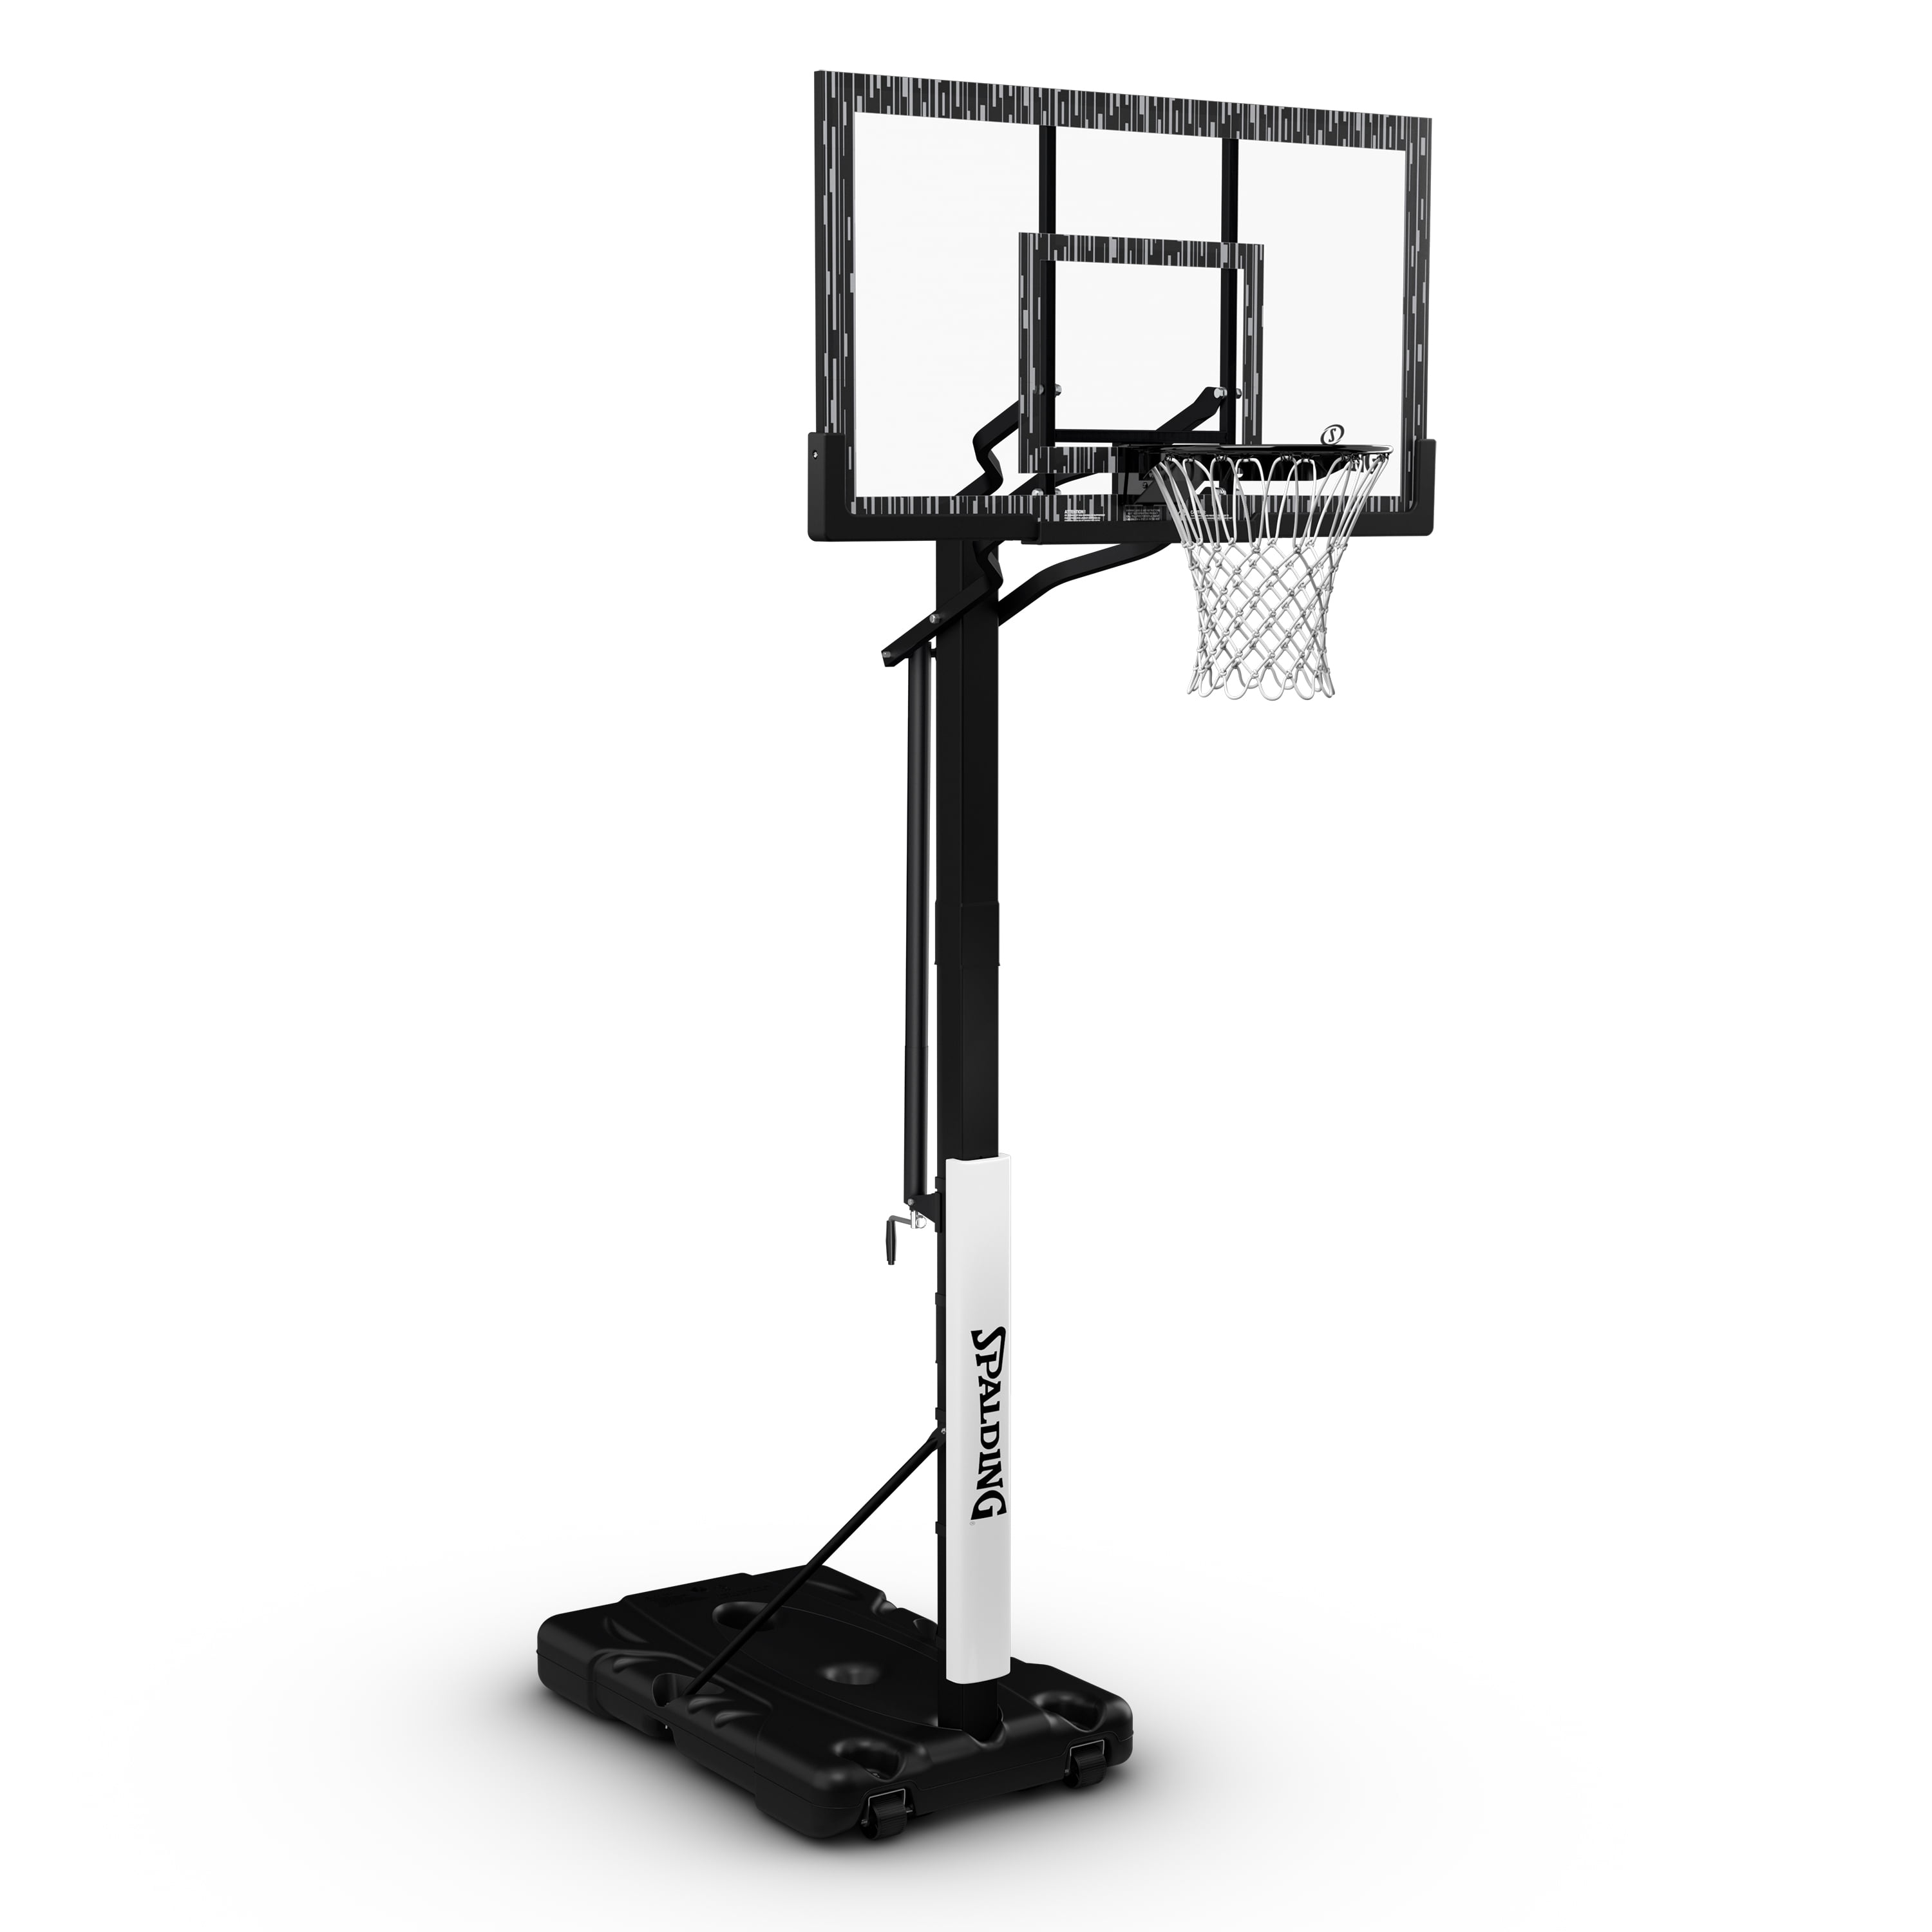 Details about   New Pro Mini Basketball Hoop Indoor Outdoor Home Yard Free Shipping Bedroom Gift 